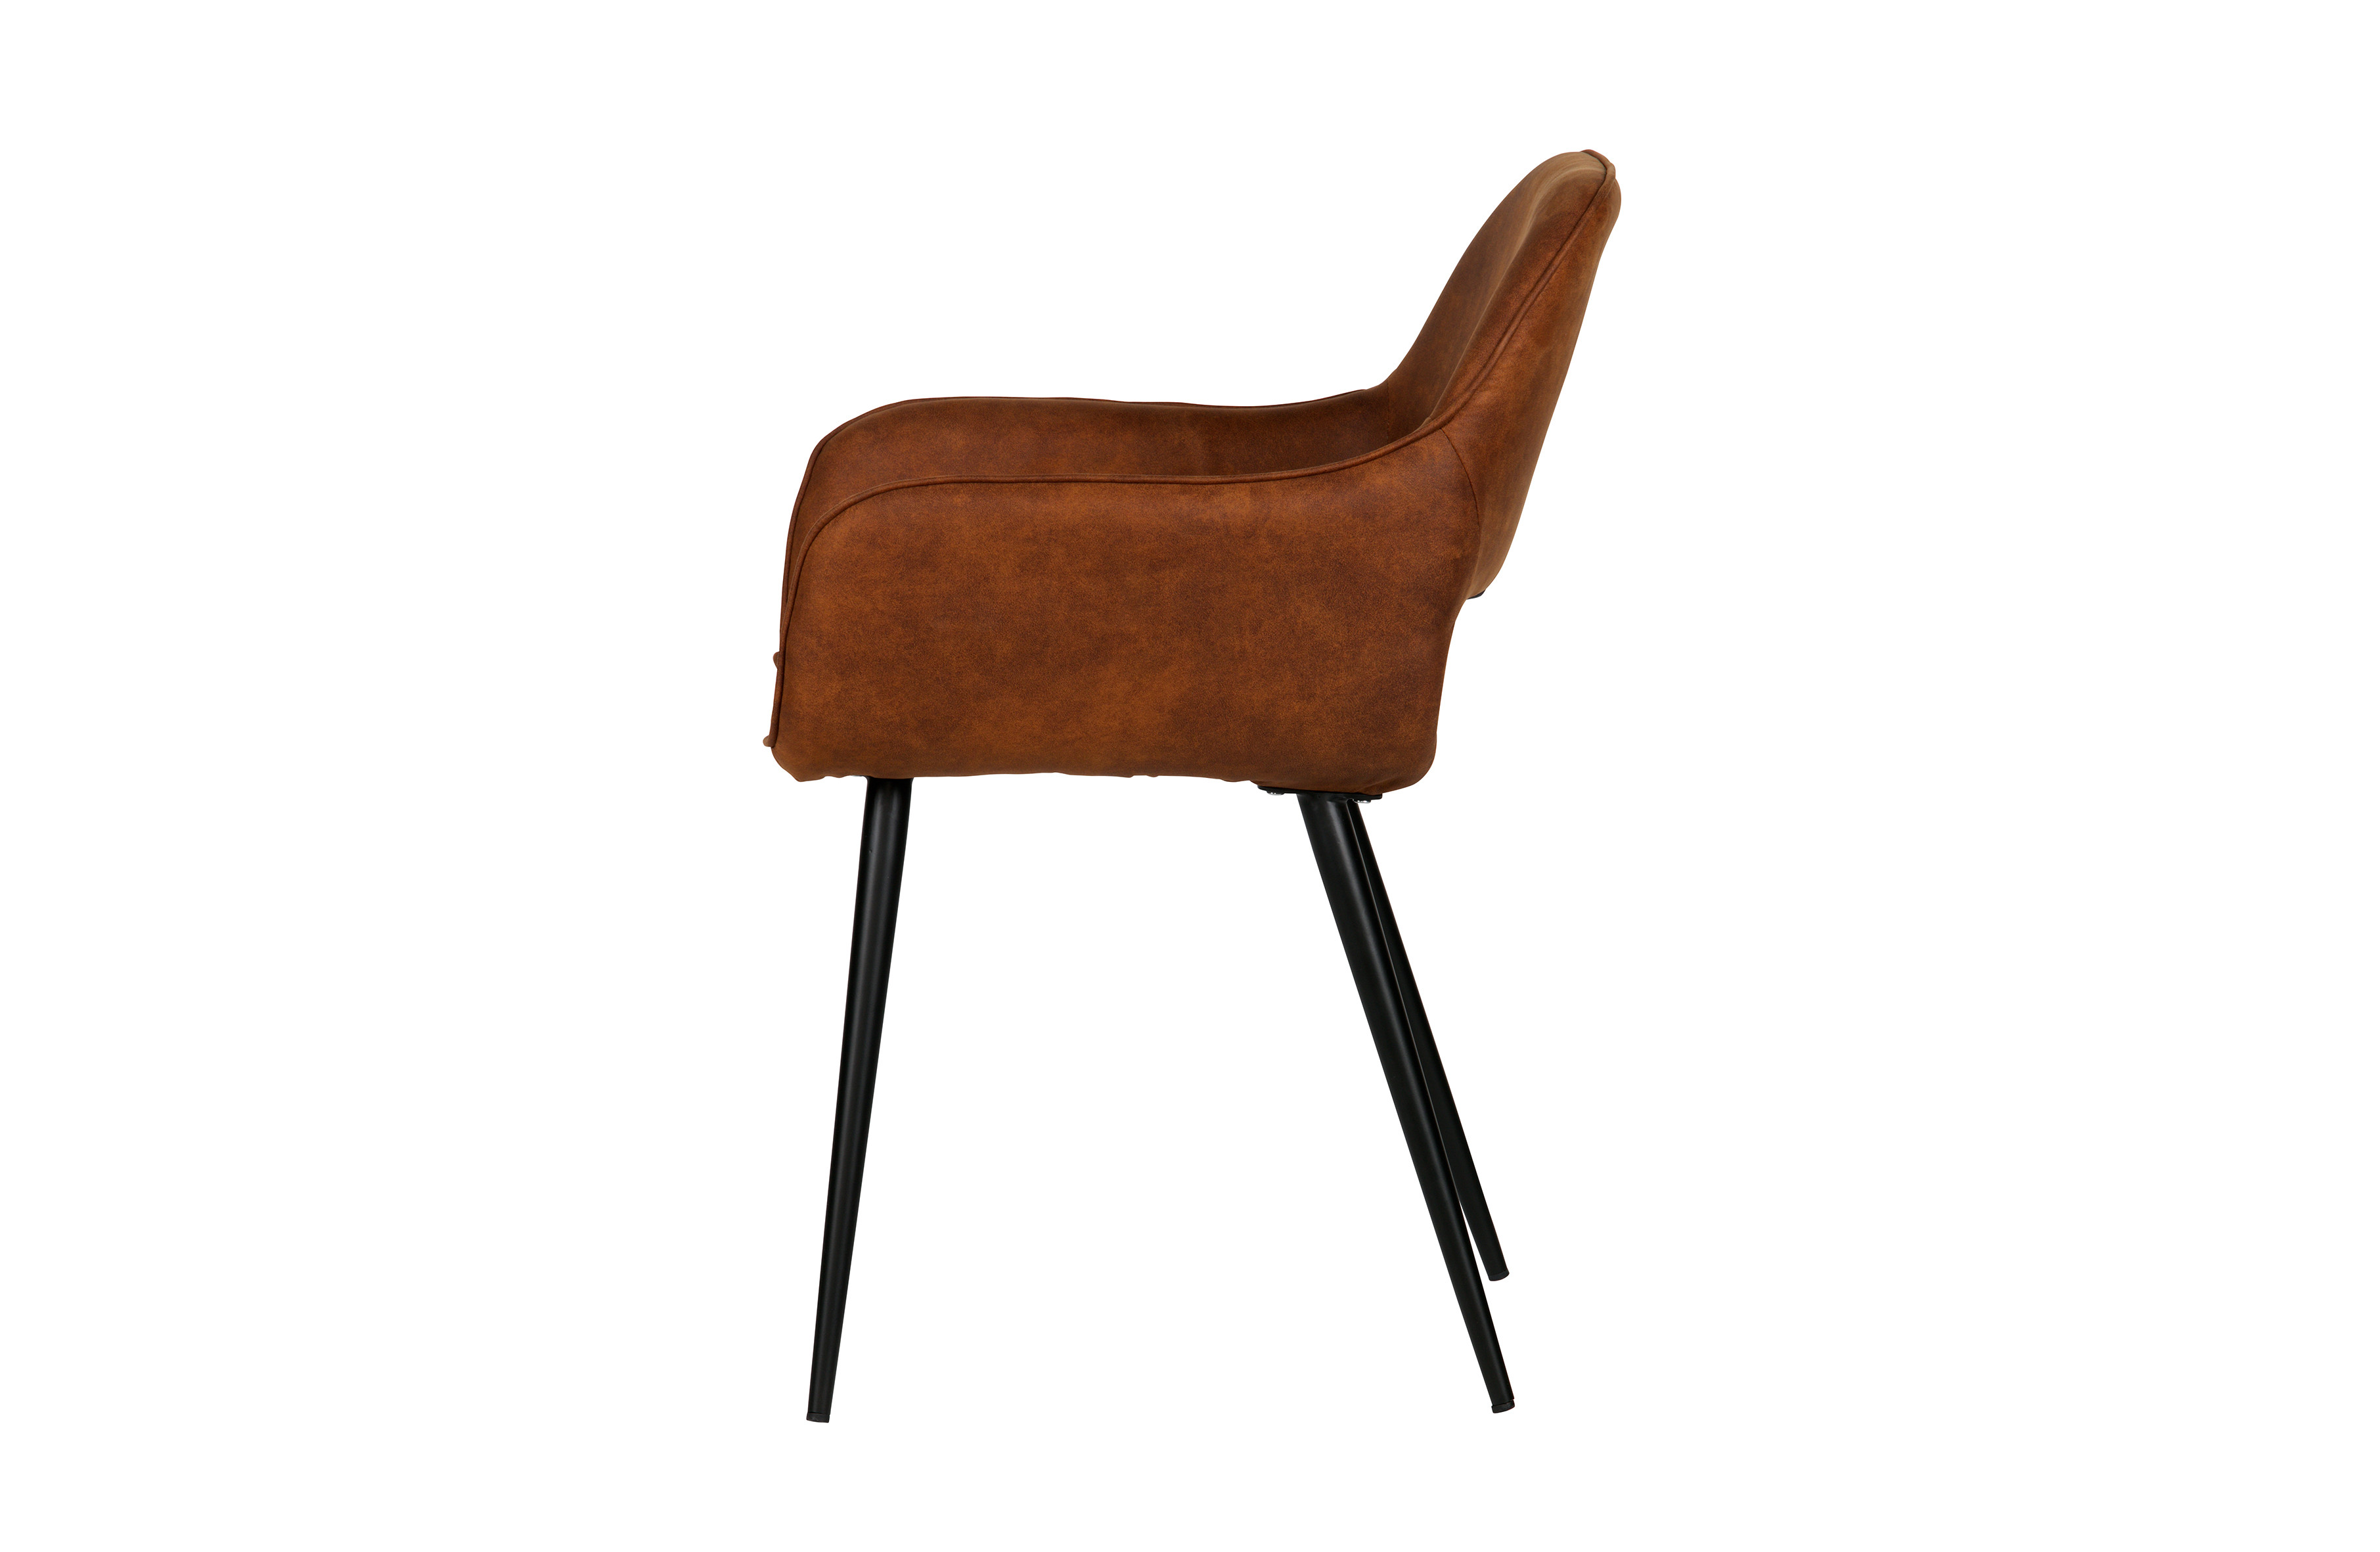 Rent a Dining chair Jelle cognac? Rent at KeyPro furniture rental!